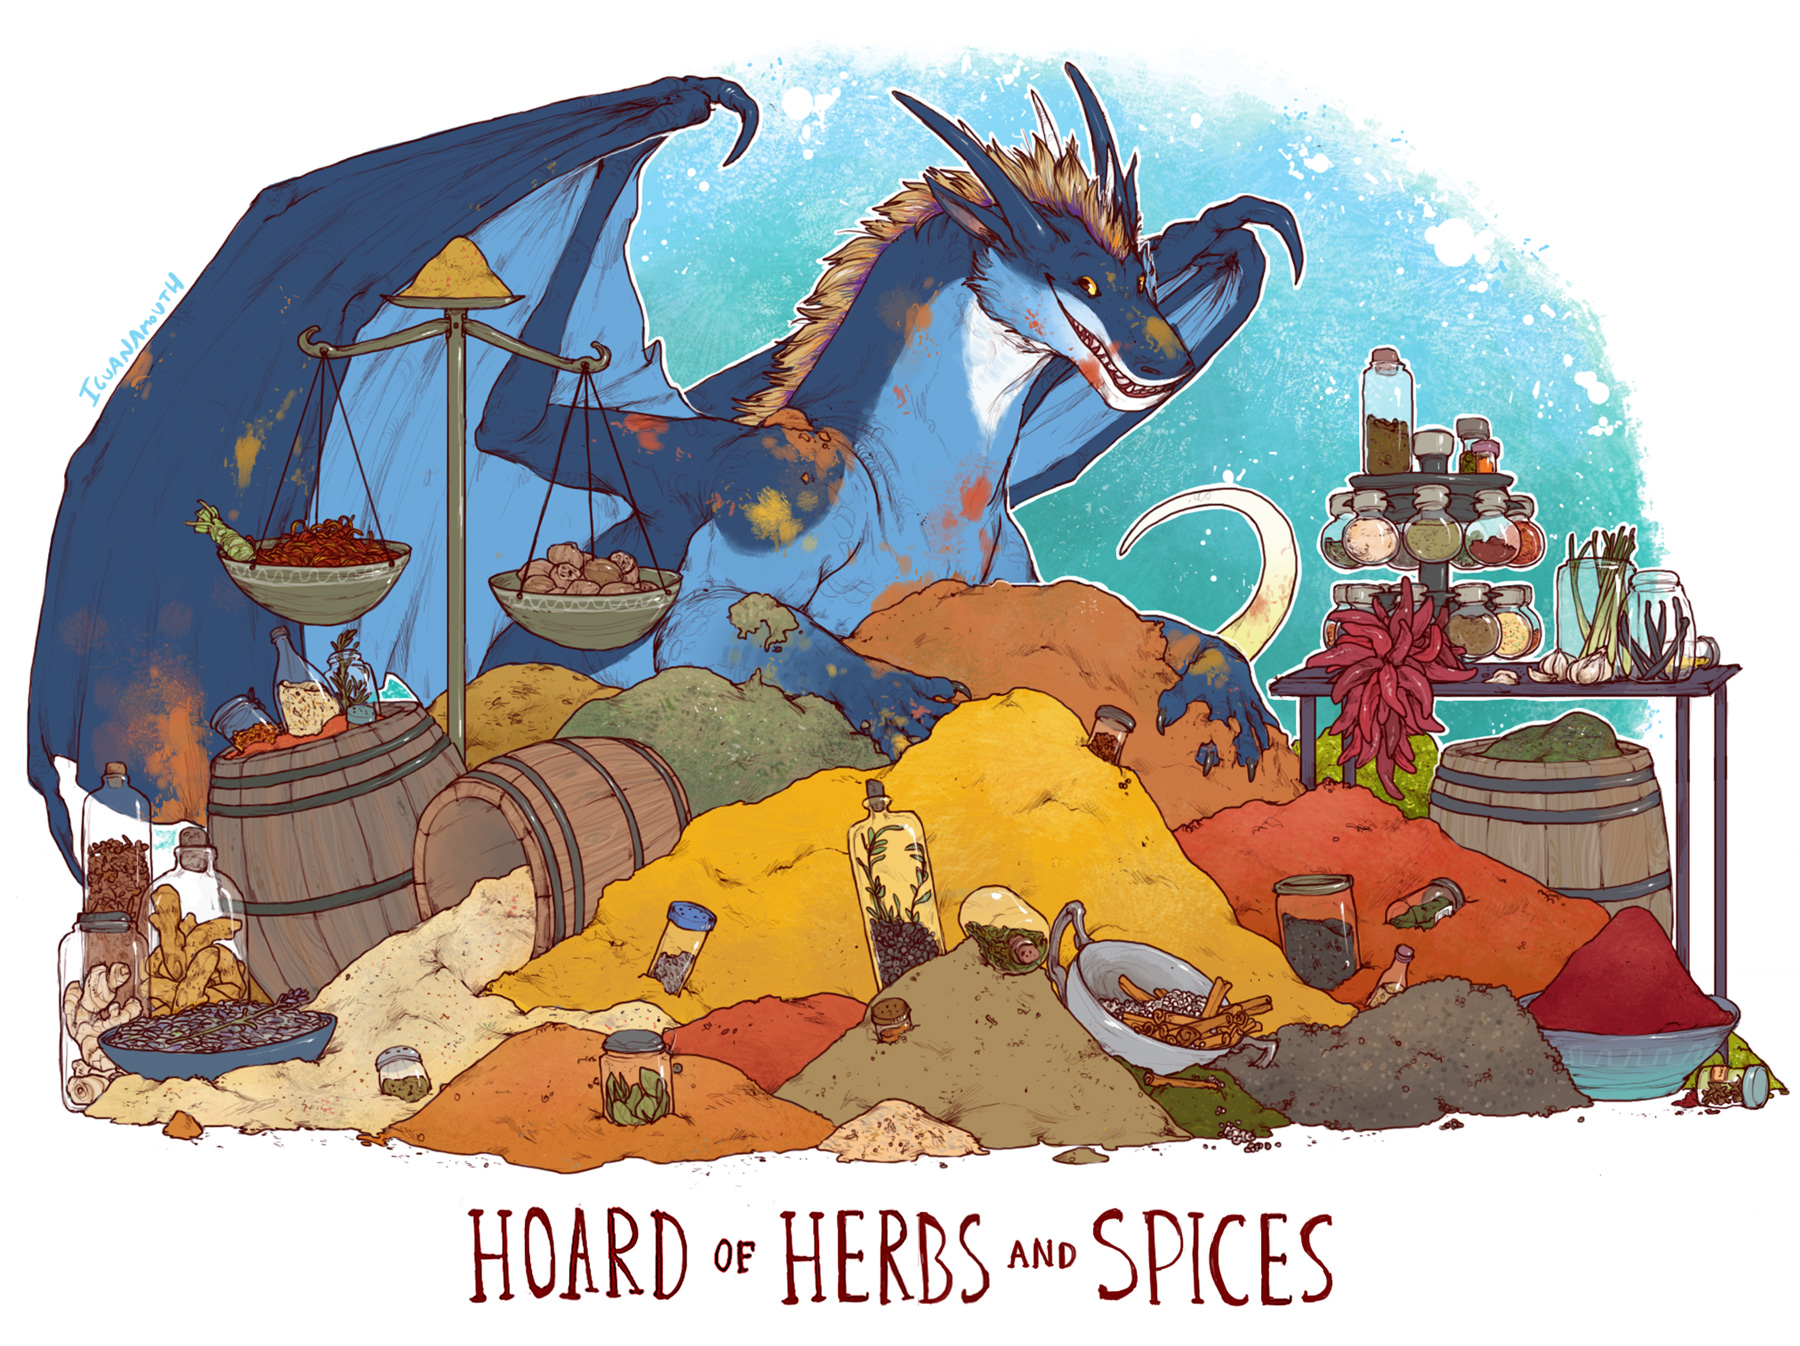 IguanaMouth Hoard of Herbs and Spices. 